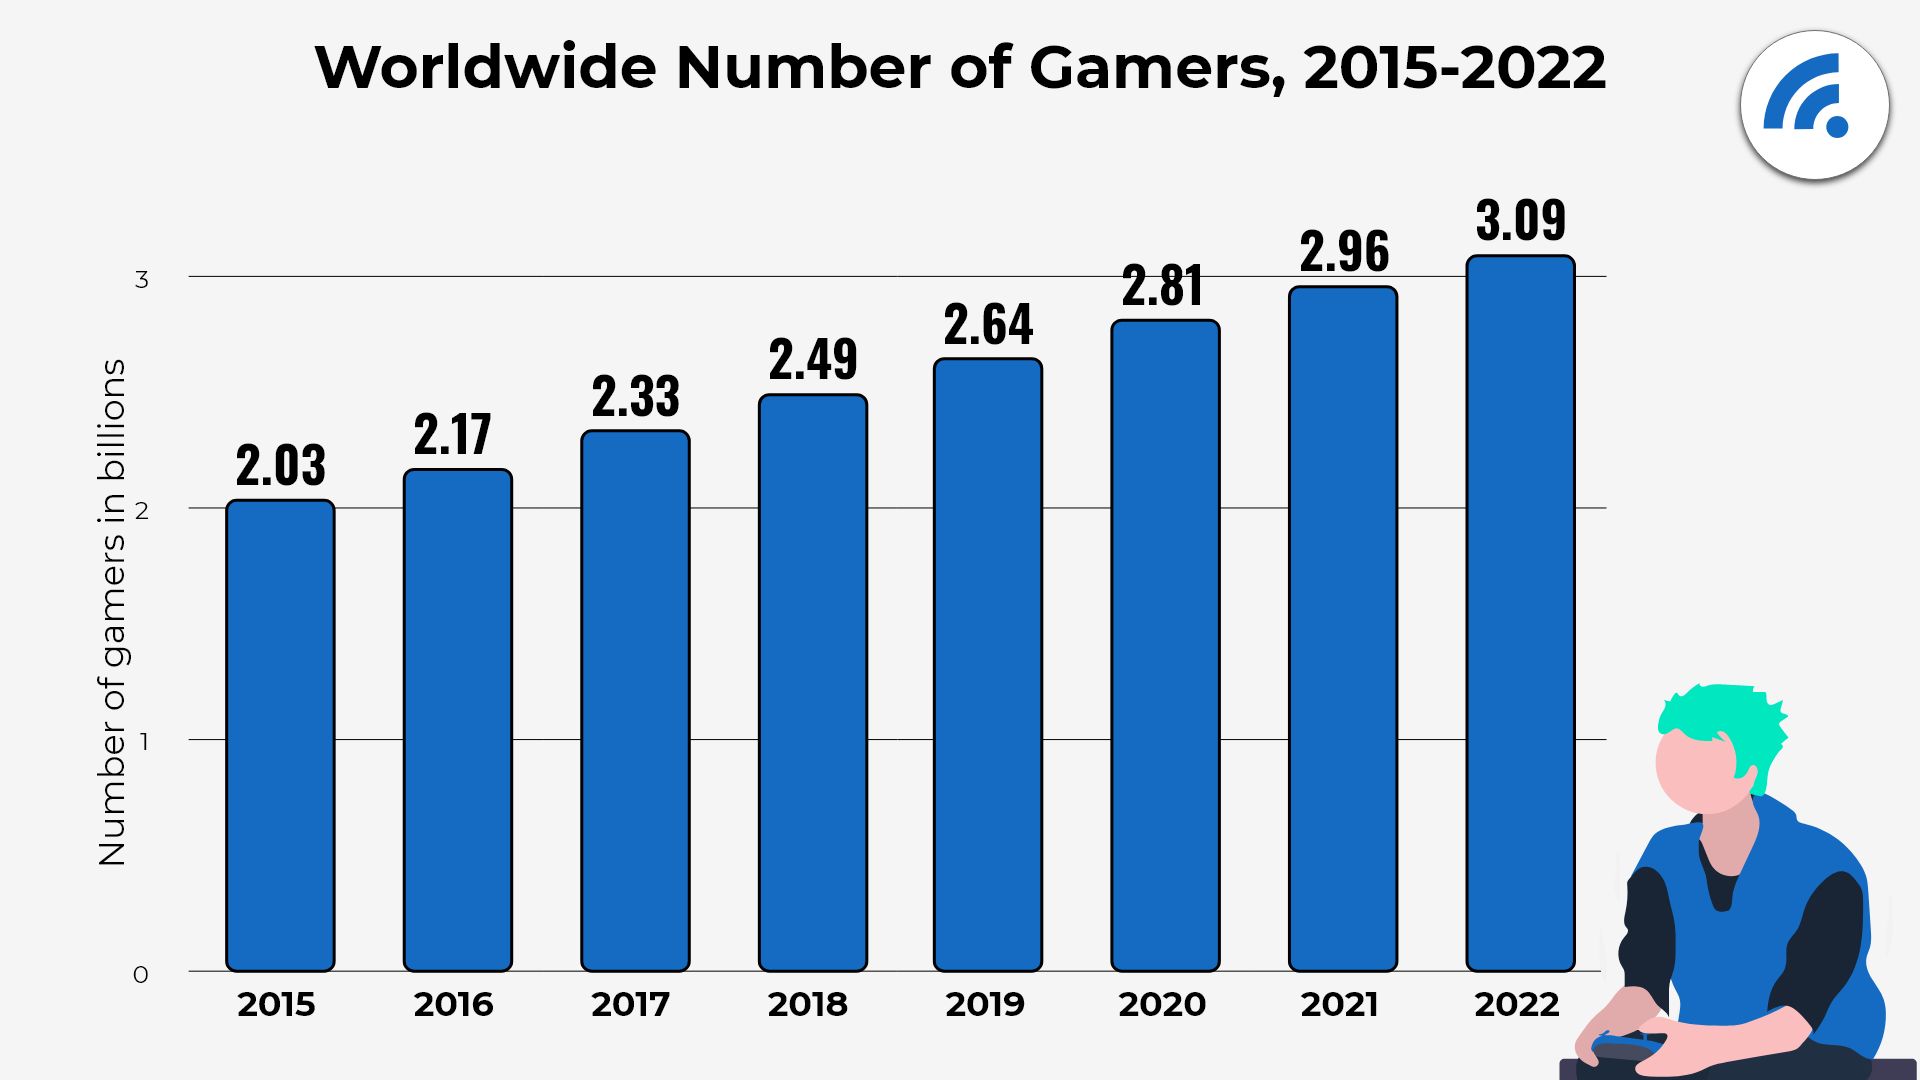 In 2015 Which Of The Following Comprised The Largest Segment Of The Online Gaming Audience?